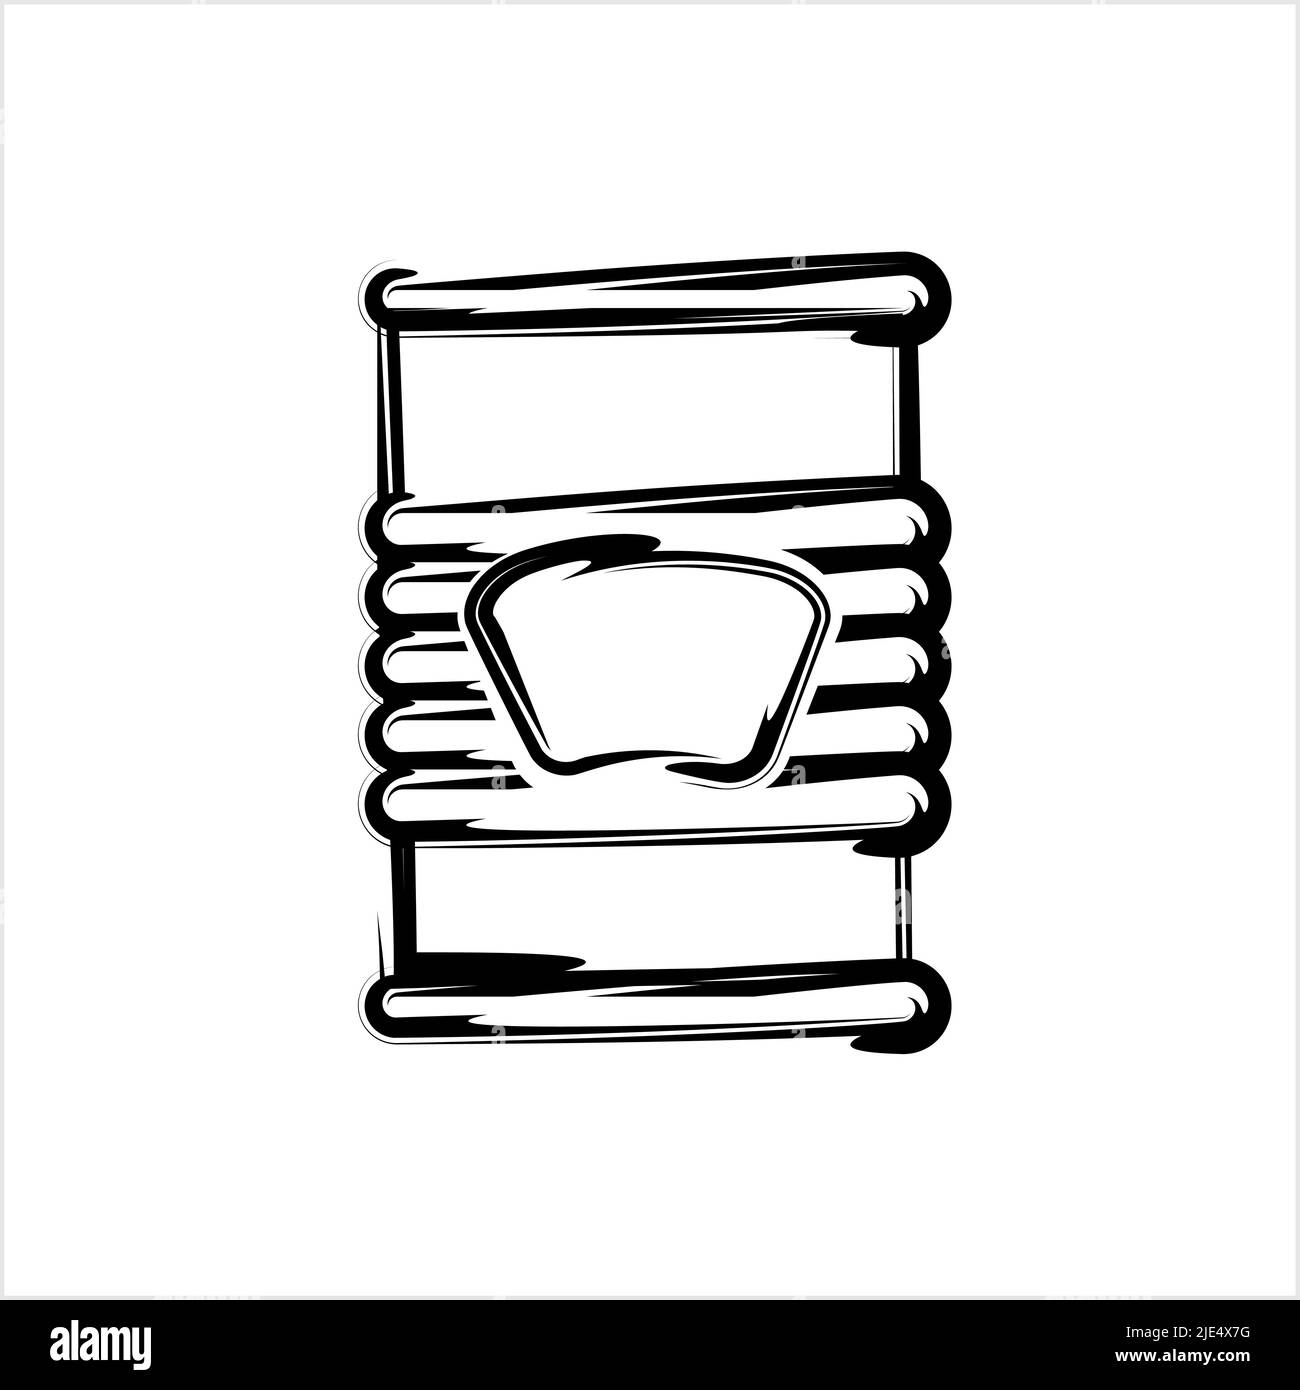 Canned Food Icon, Food Tin Vector Art Illustration Stock Vector